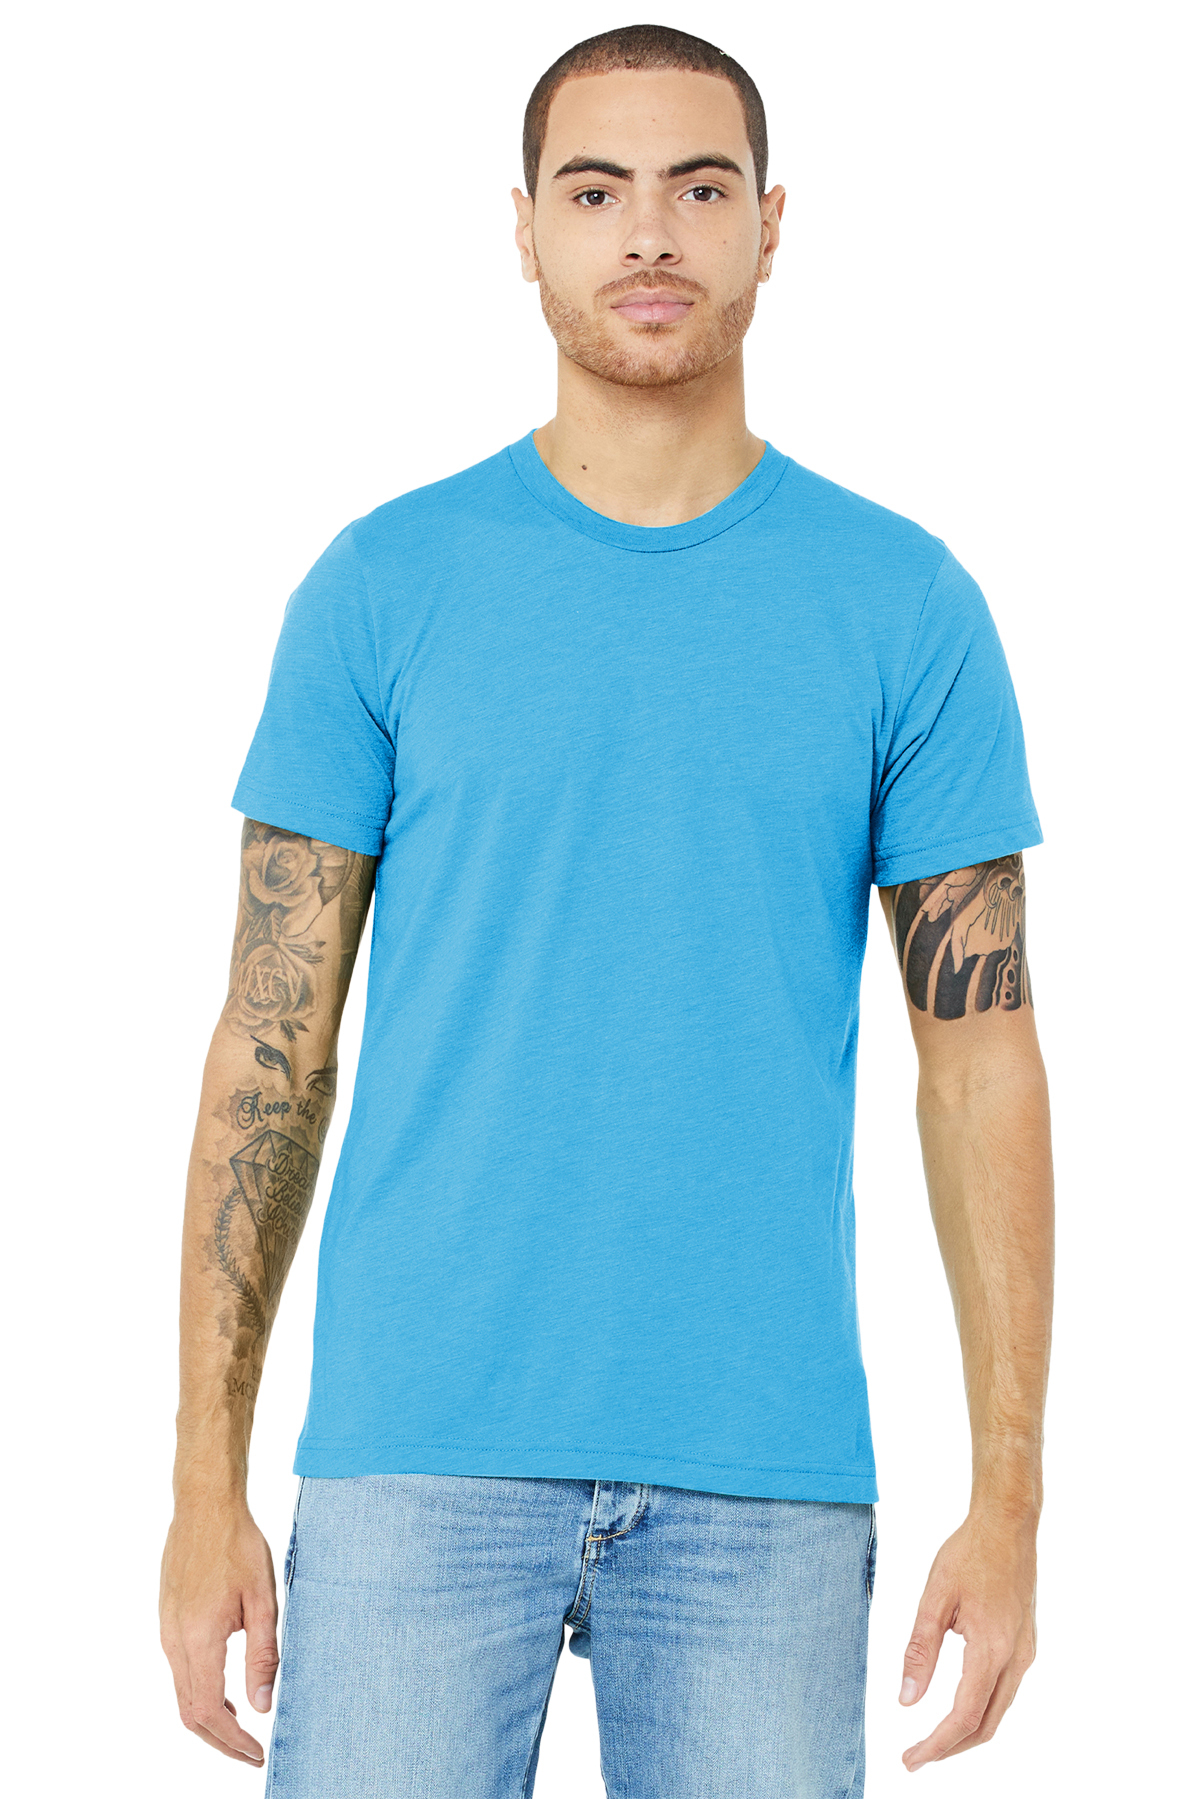 BELLA+CANVAS Unisex Triblend Short Sleeve Tee | Product | Company Casuals